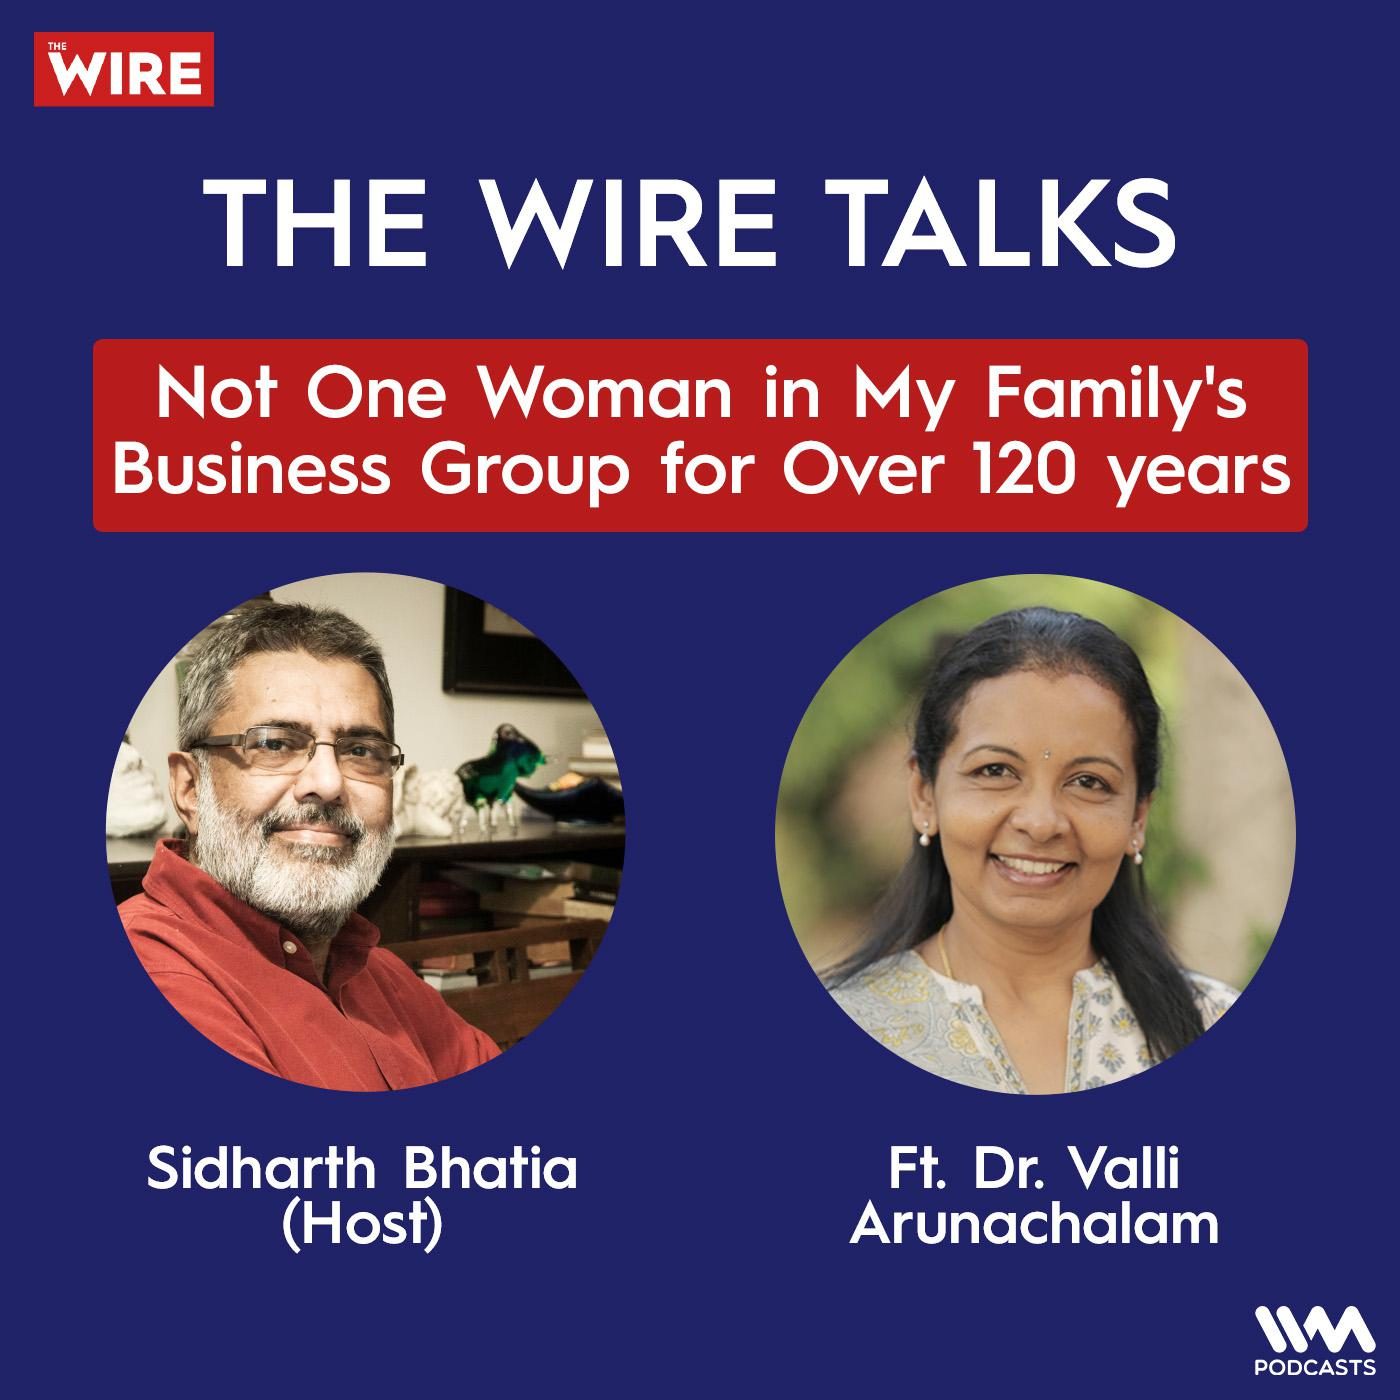 Not One Woman in My Family's Business Group for Over 120 years Dr. Valli Arunachalam